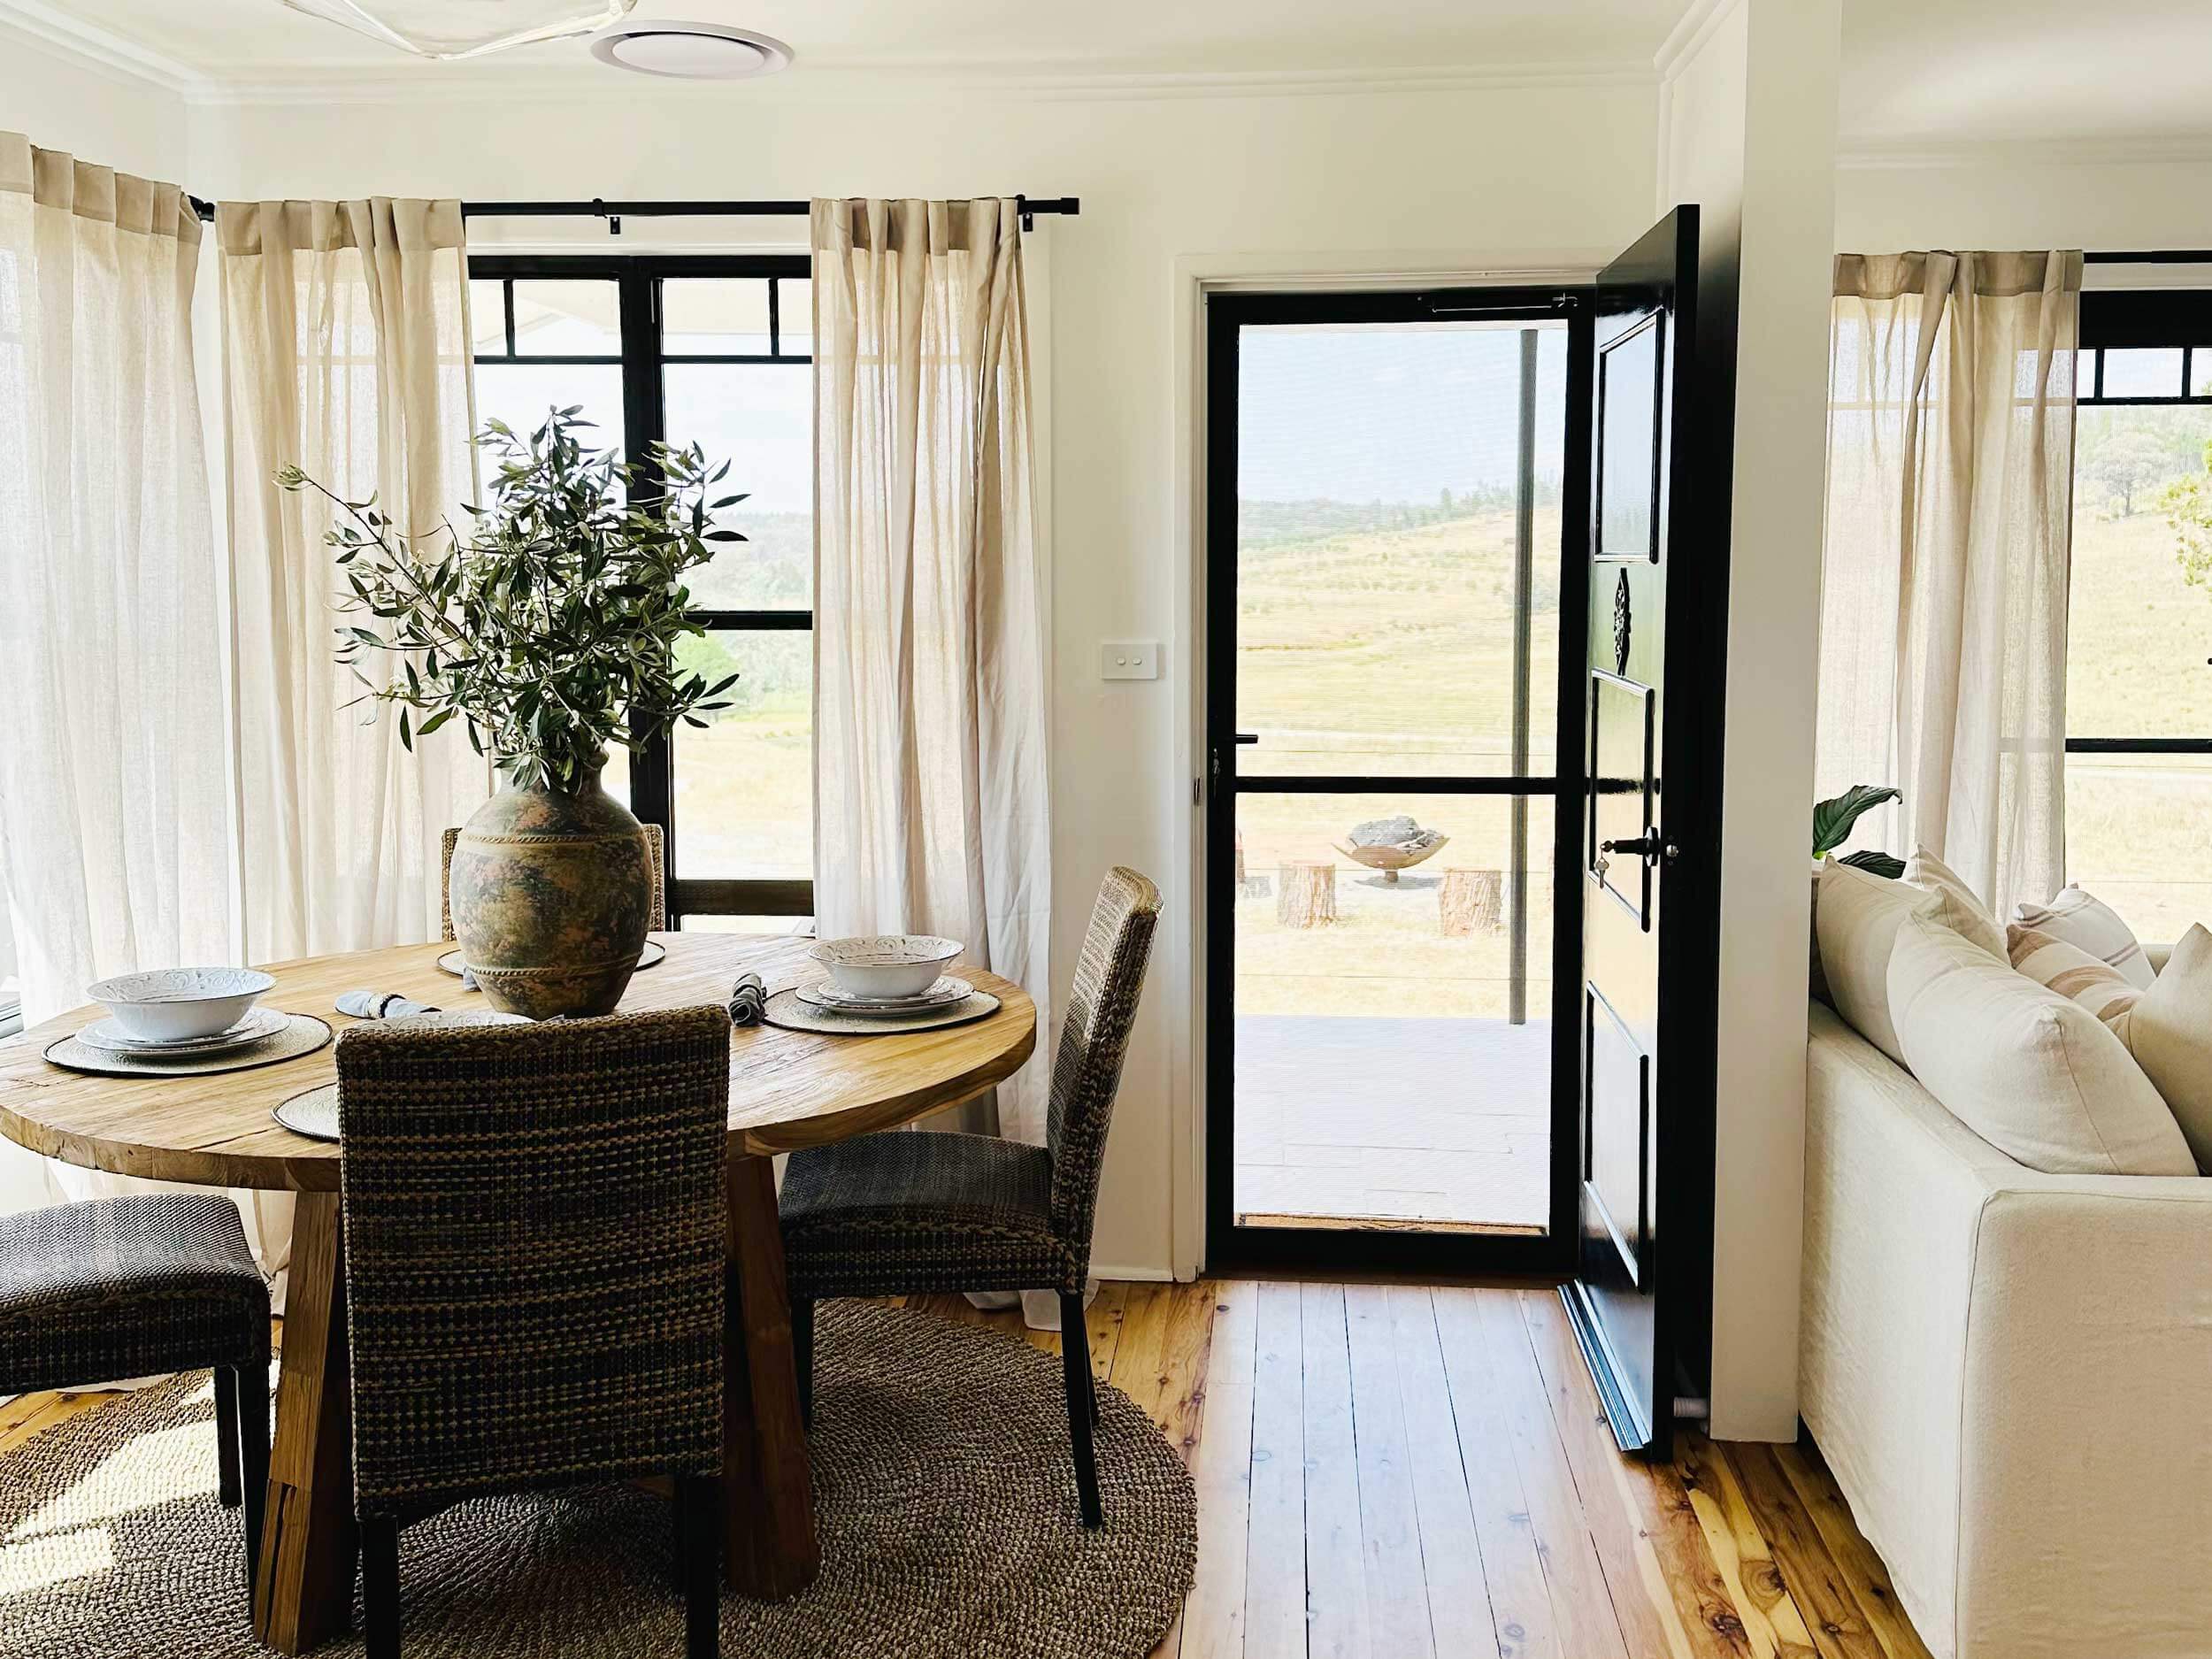 View from inside Mulberry Cottage, overlooking the olive groves at Glen Donald Estate, near Cowra and Grenfall, NSW